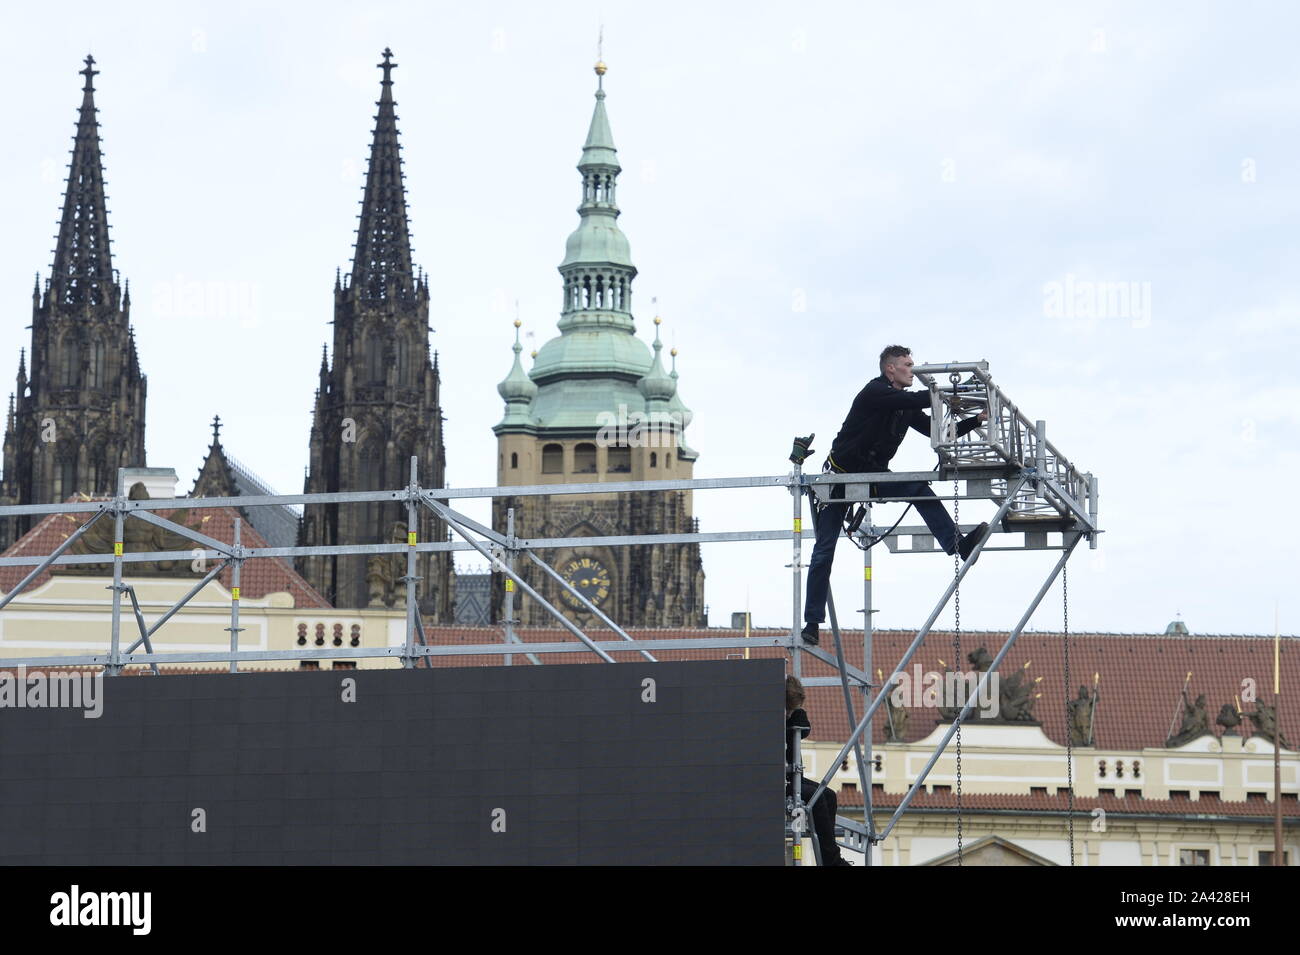 The instalation of the large-scale screen on Hradcany square outside the Prague Castle, Prague, Czech Republic, October 11, 2019. On Saturday, October 12, a mourning ceremony will take place in St Vitus Cathedral at the Prague Castle, the seat of Czech kings and presidents, at 11:00. The heritage site will be partially closed to the public until 14:00 over the event that will be for invited guests only. The public can watch it on large-scale screens. Czech pop singer Karel Gott died at 80 on October 1, 2019, before midnight at home in his family circle. Gott was at the top of music for some 60 Stock Photo